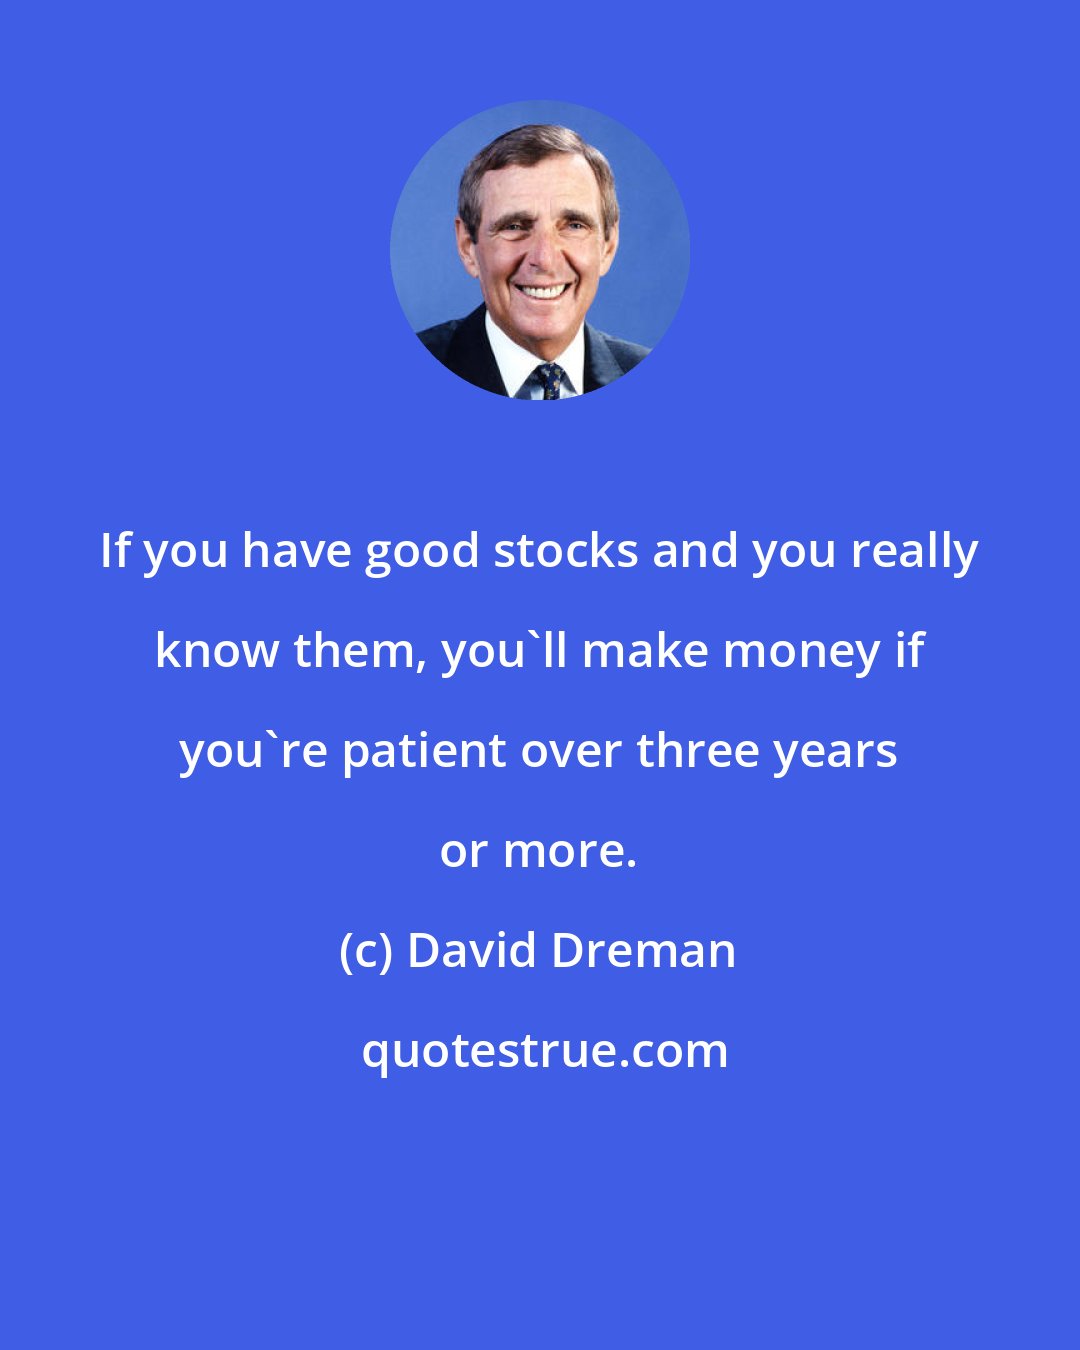 David Dreman: If you have good stocks and you really know them, you'll make money if you're patient over three years or more.